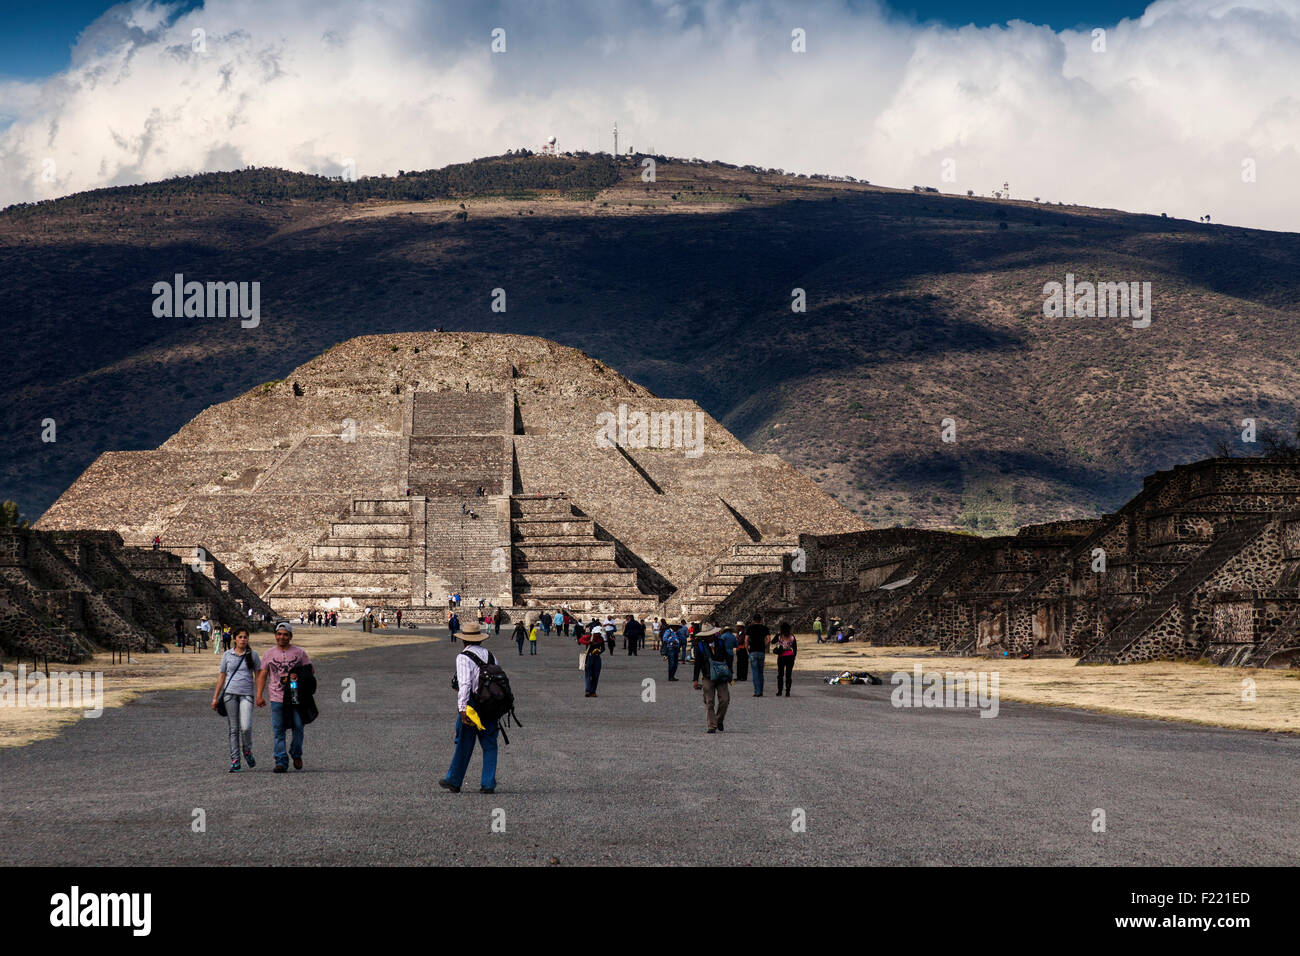 Pyramid of the Moon Teotihuacan archaeological site Unesco World Heritage Site Mexico America Stock Photo